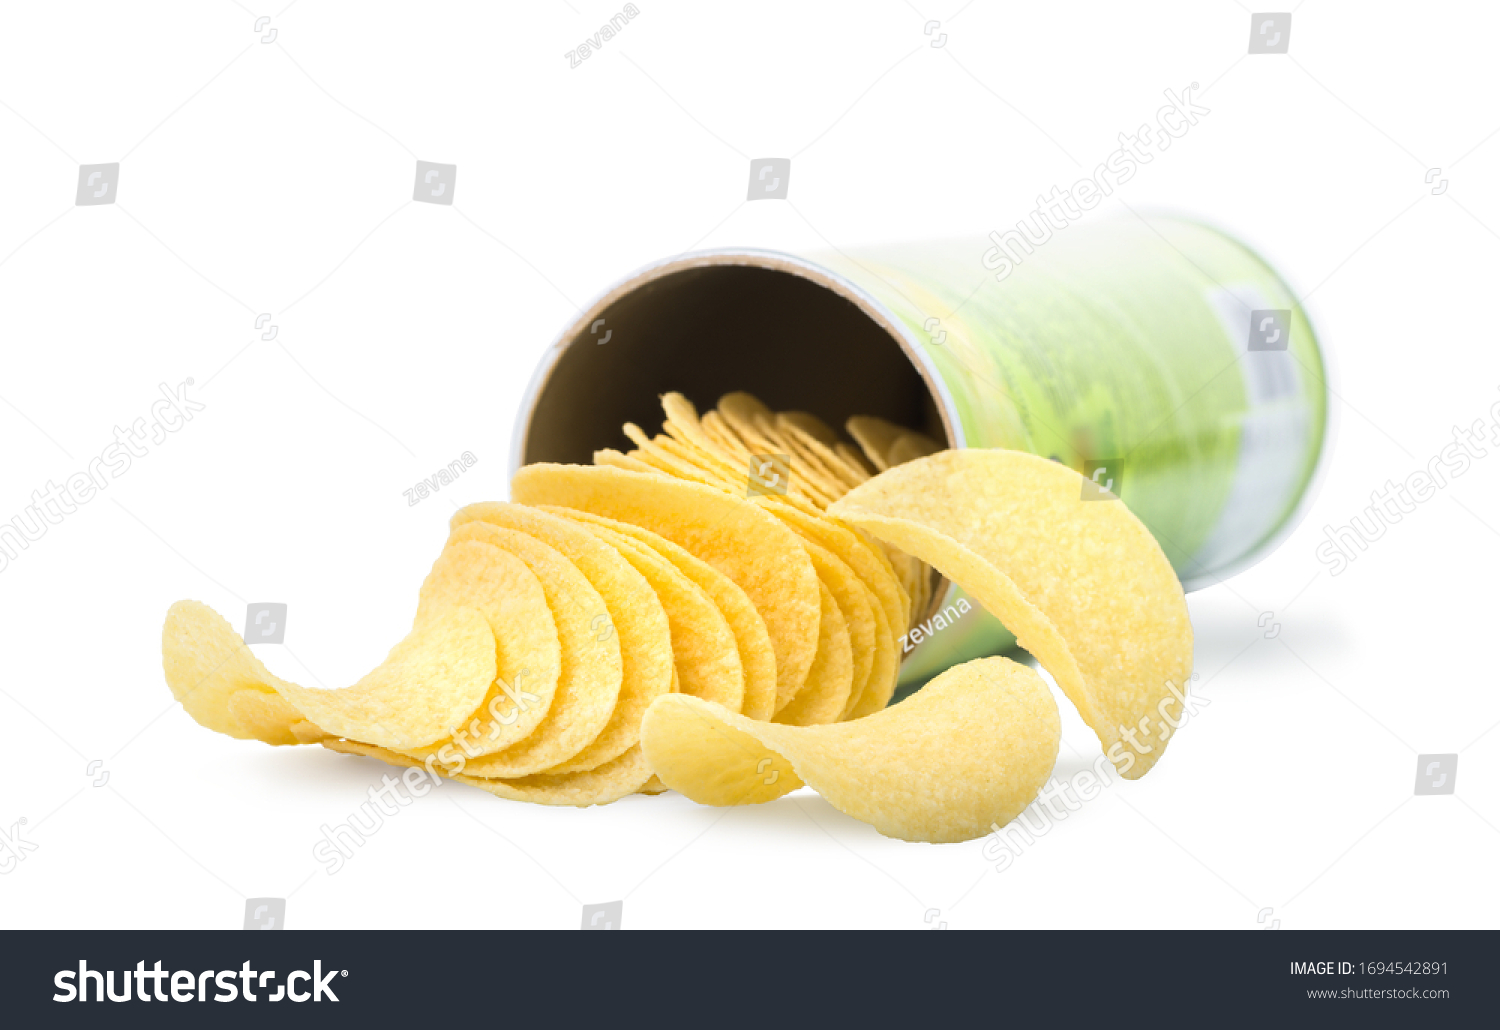 5,372 Chips tube Images, Stock Photos & Vectors | Shutterstock